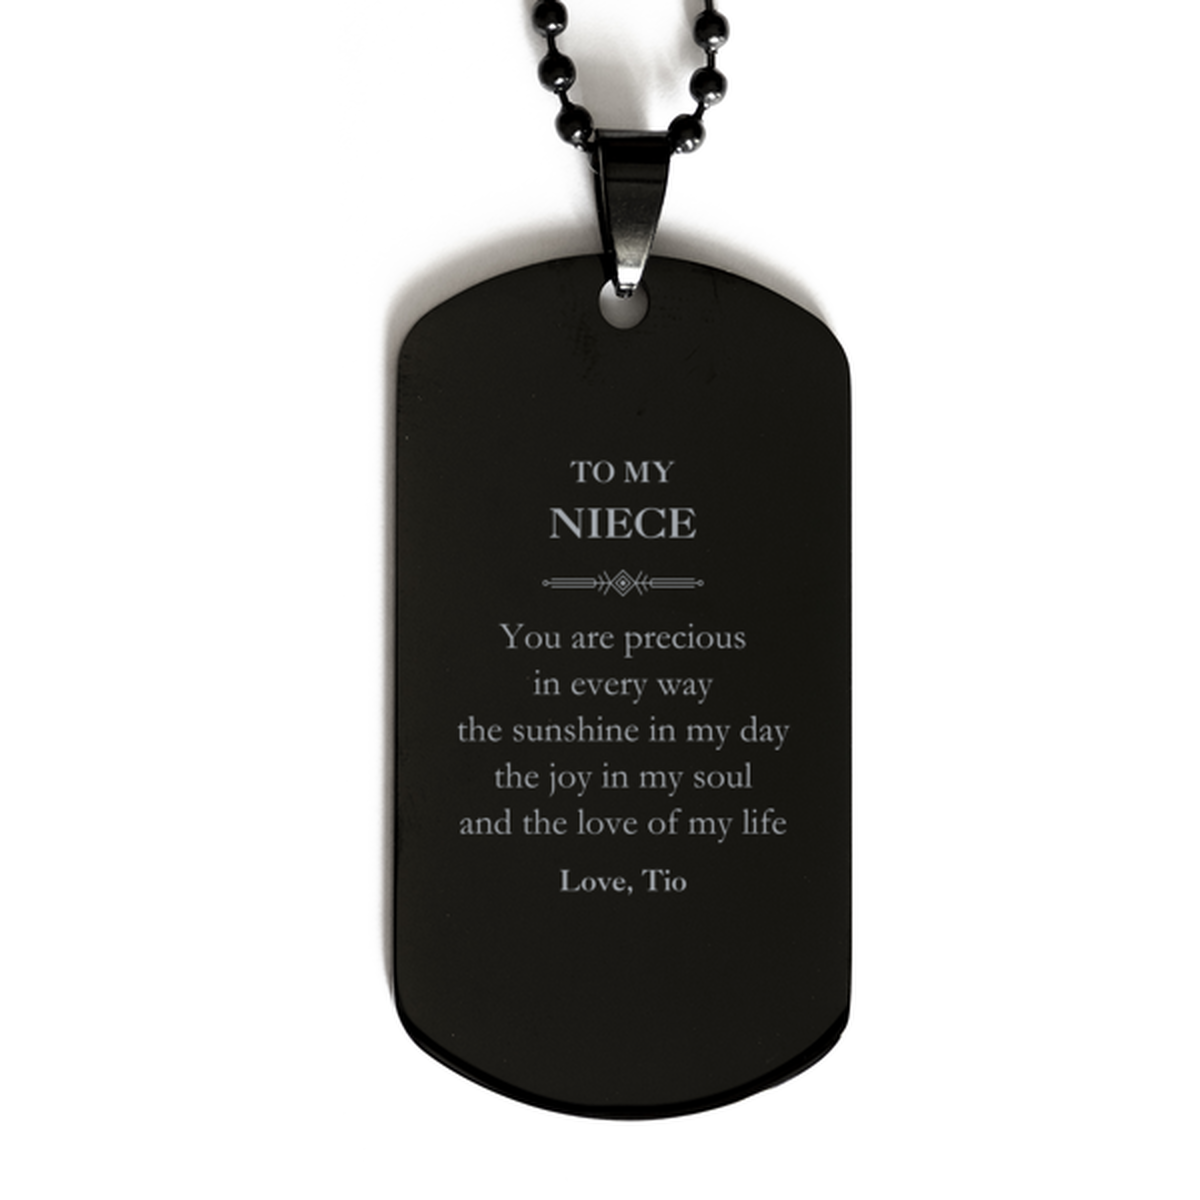 Graduation Gifts for Niece Black Dog Tag Present from Tio, Christmas Niece Birthday Gifts Niece You are precious in every way the sunshine in my day. Love, Tio